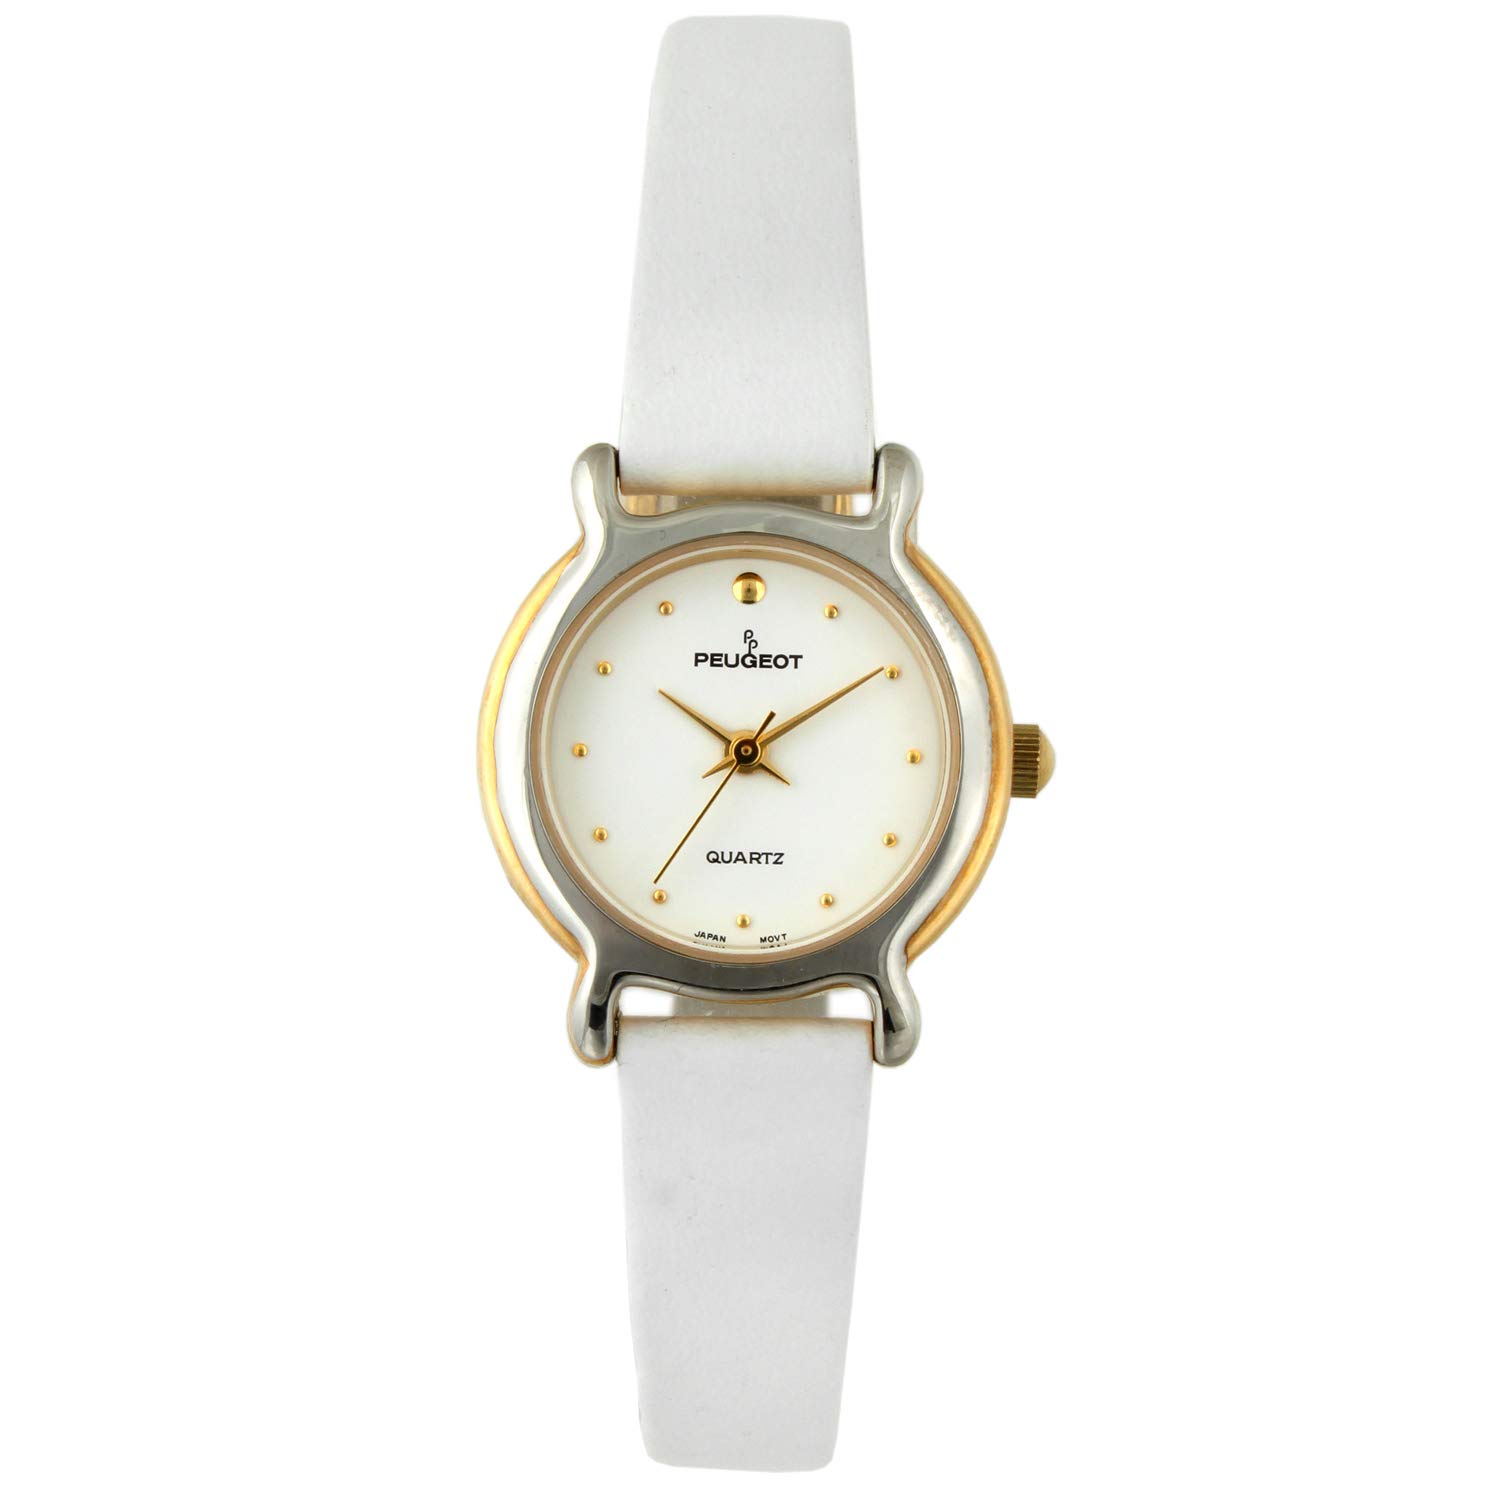 Peugeot Women White Summer Wrist Watches with Leather Wrist Bands